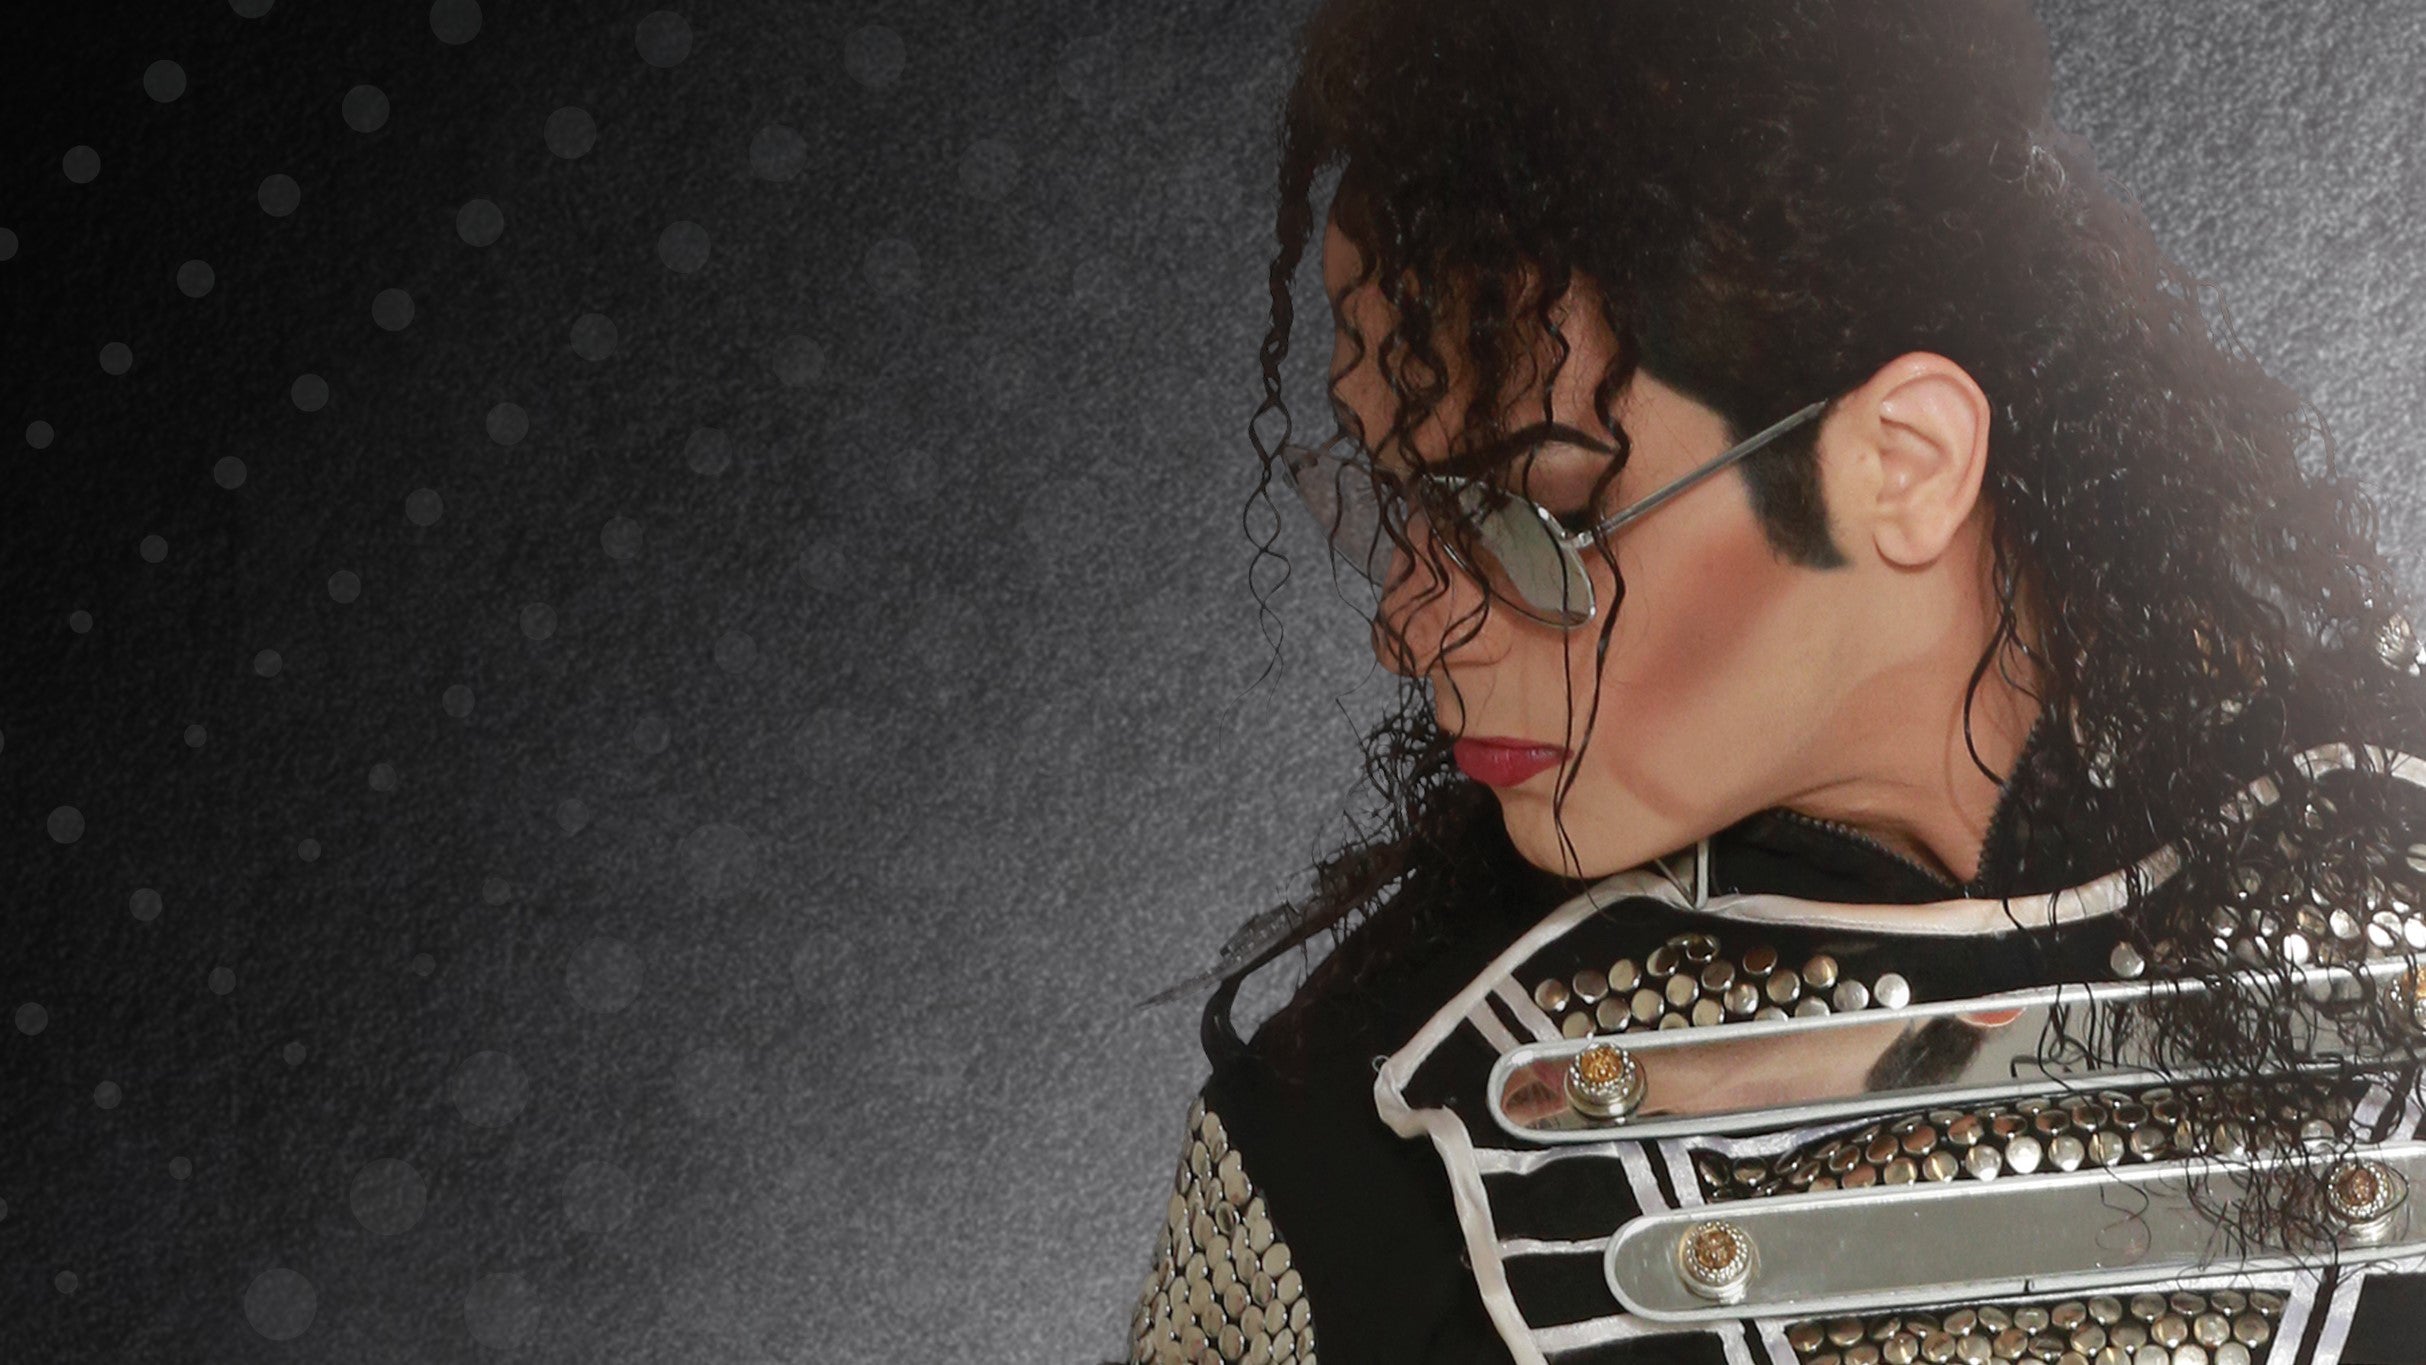 MJ LIVE - Michael Jackson Tribute in Rosemont promo photo for Discount Offer #2 presale offer code